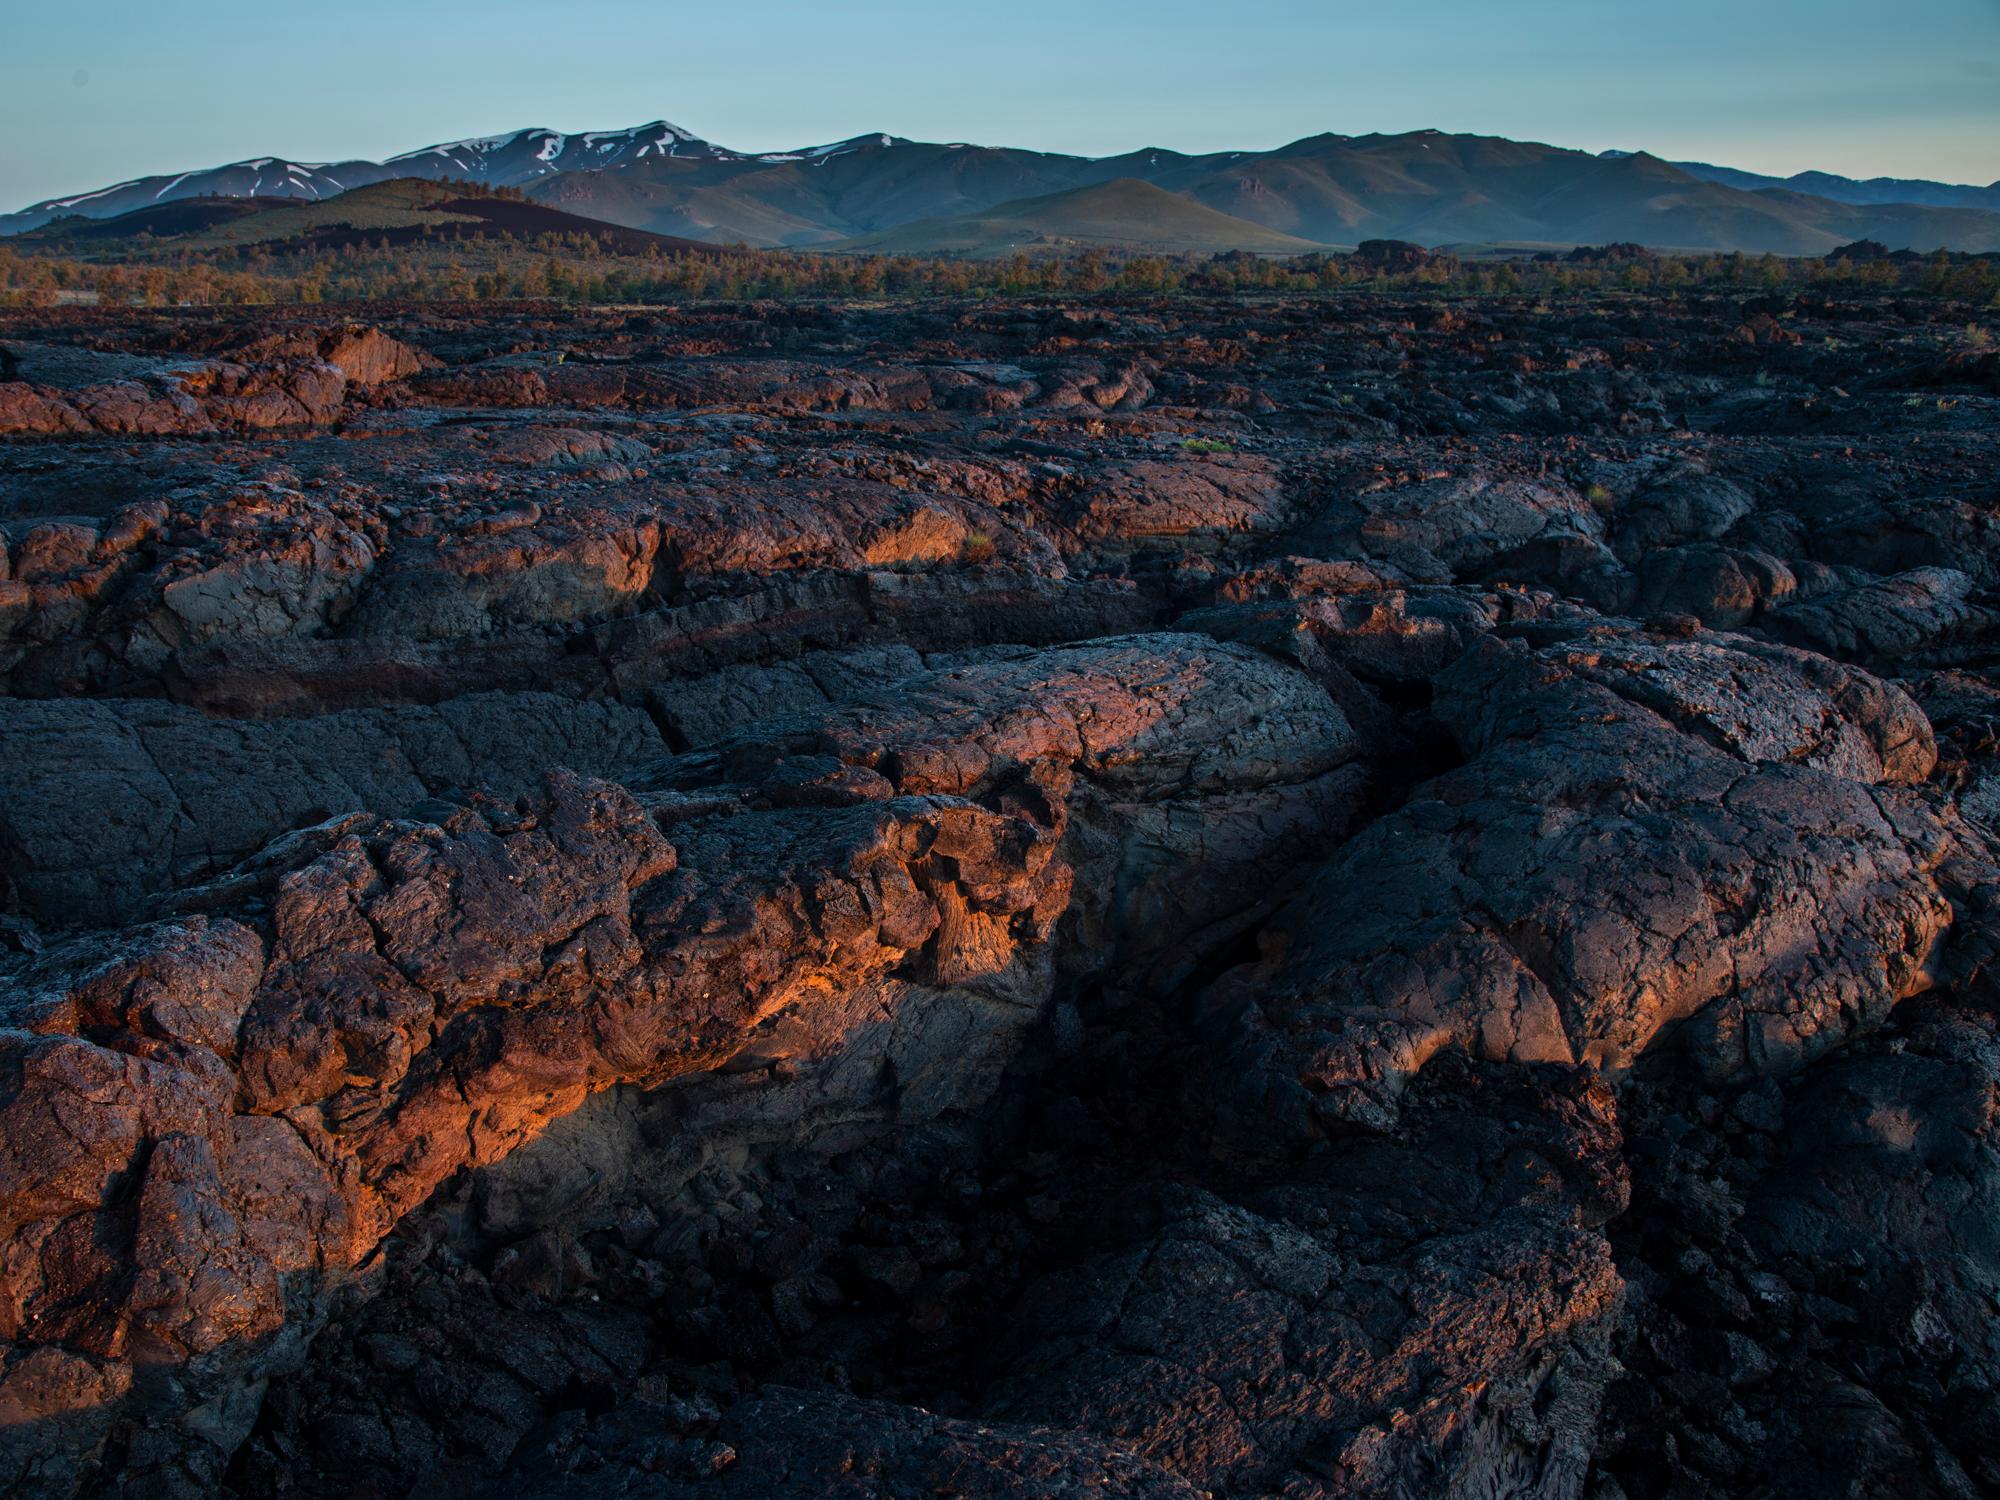 A close-up shot of a folded, waving sea of lava rock, with mountains in the far distance.